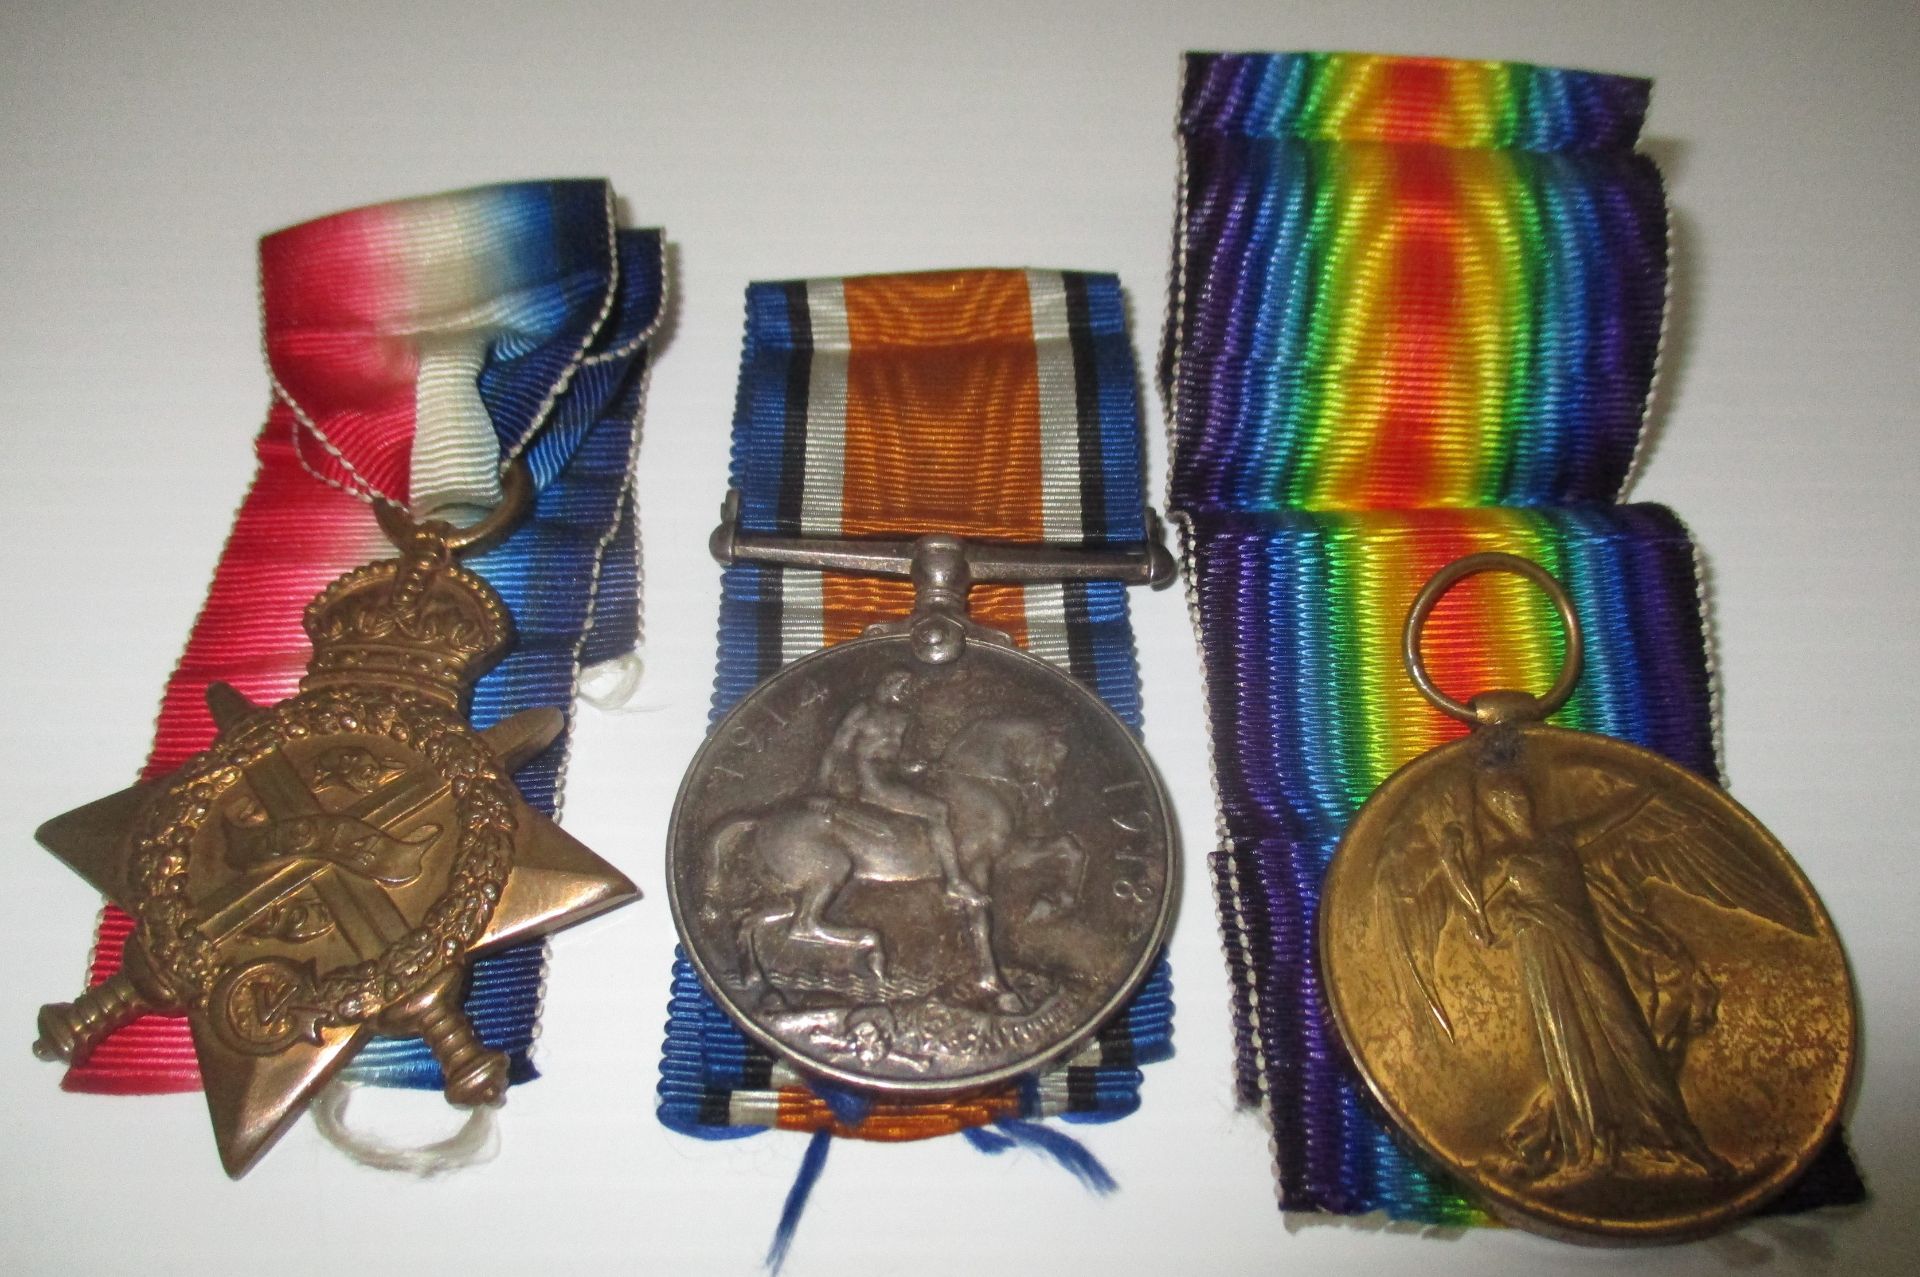 A 1914 Star, War Medal and Victory Medal to 18030 Dvr. W.